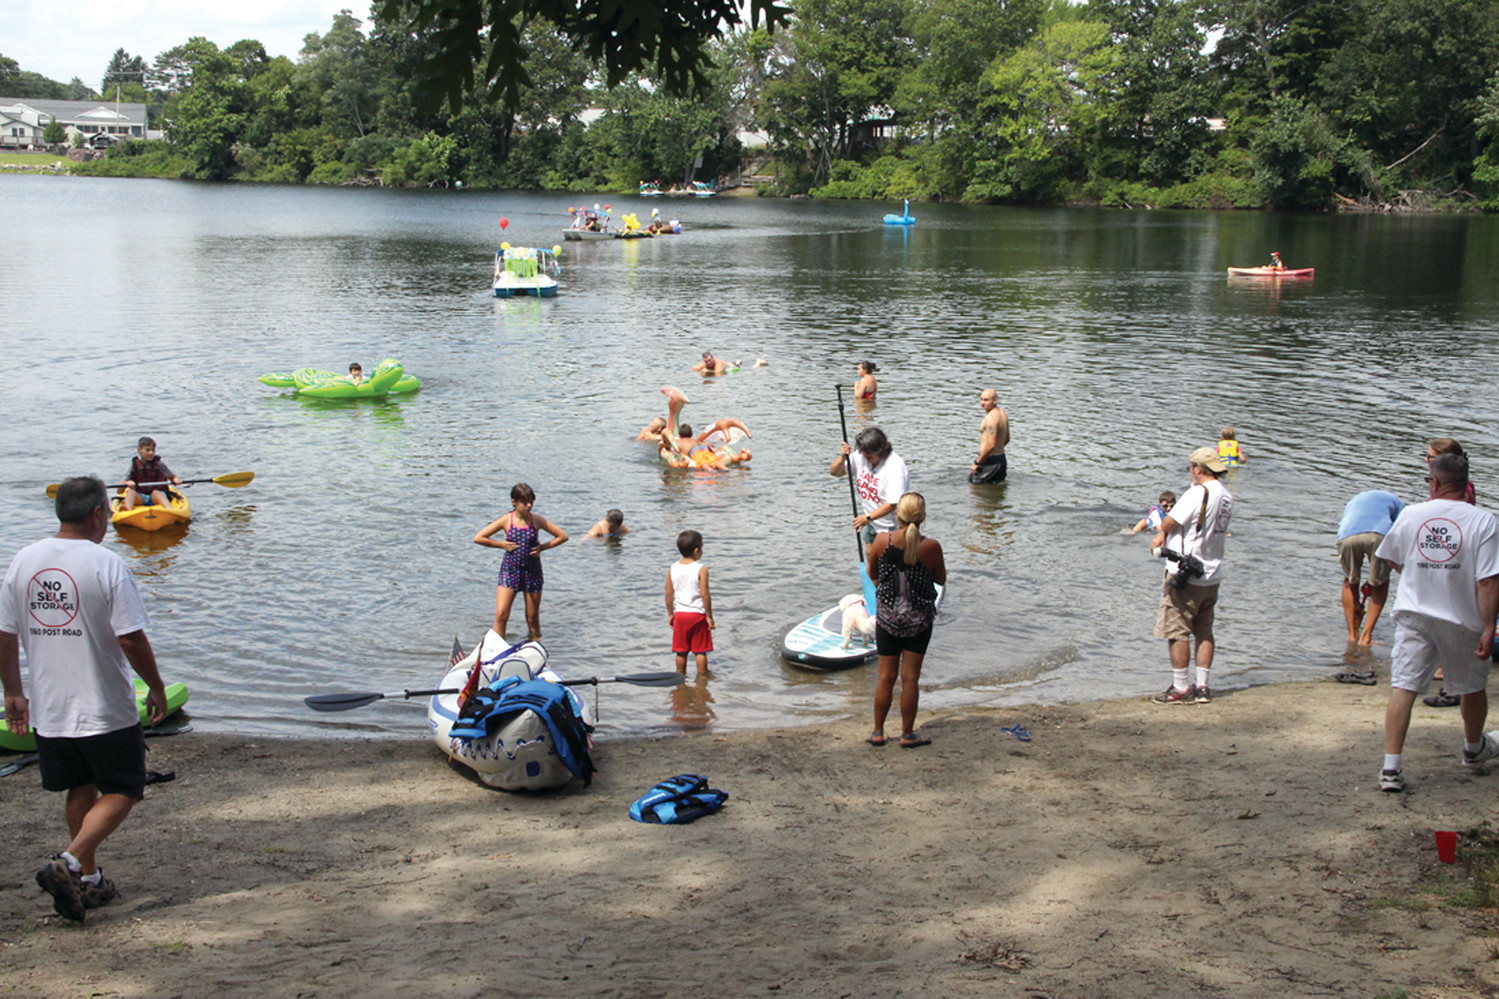 POND PLAY: The water was a perfect temperature Saturday as area residents gathered both on the water and the beach for the Sand Pond Palozza in opposition to a proposal to build a 630-unit self storage-unit at Pond Plaza on Post Road.